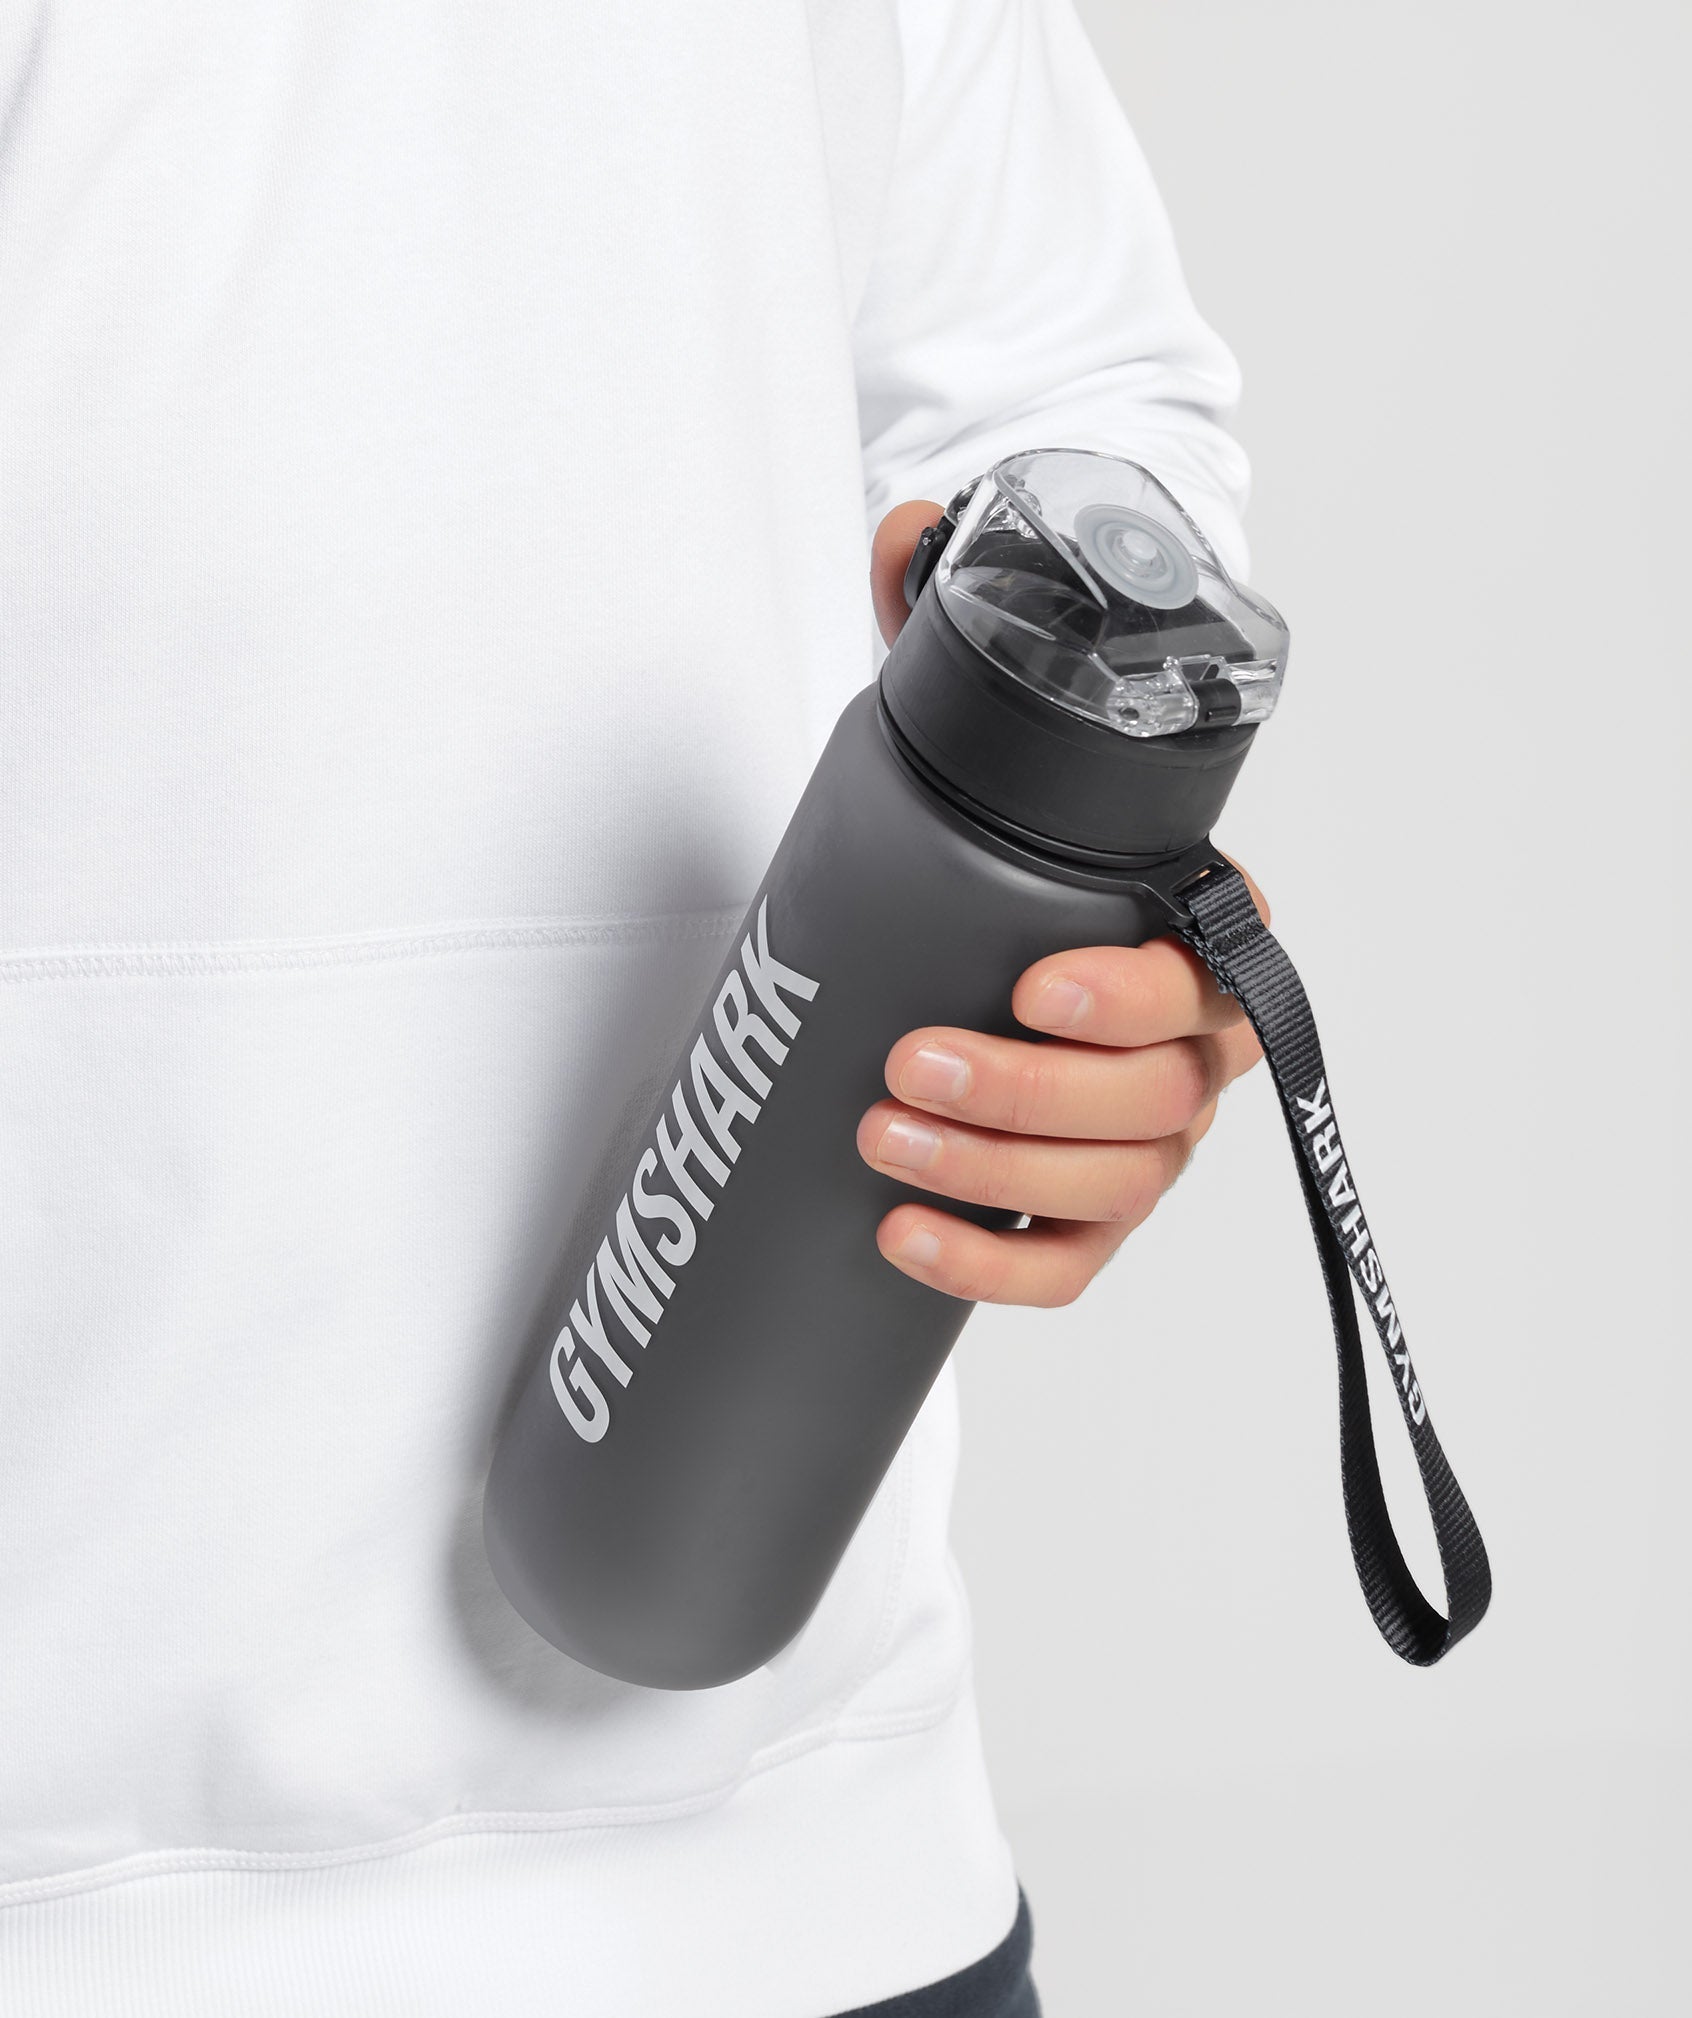 Gymshark Insulated Straw Cup - River Stone Grey/Evening Blue